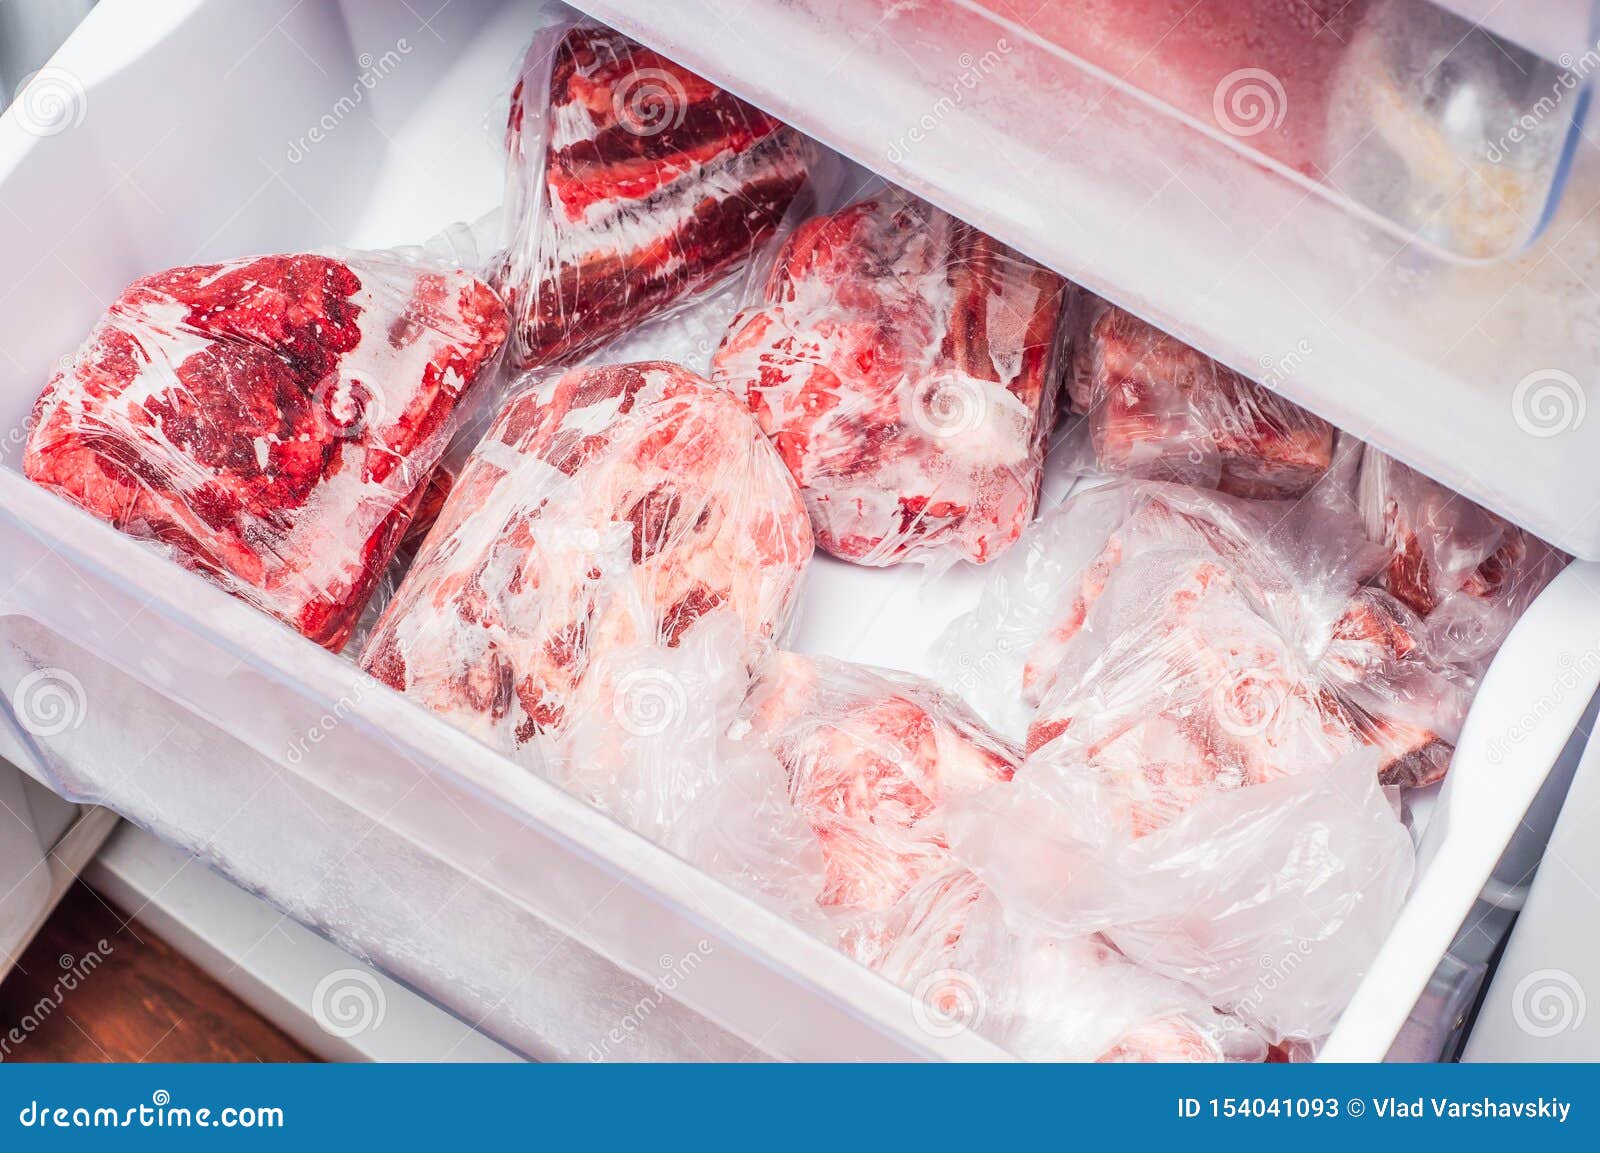 7,835 Raw Meat Freezer Images, Stock Photos, 3D objects, & Vectors